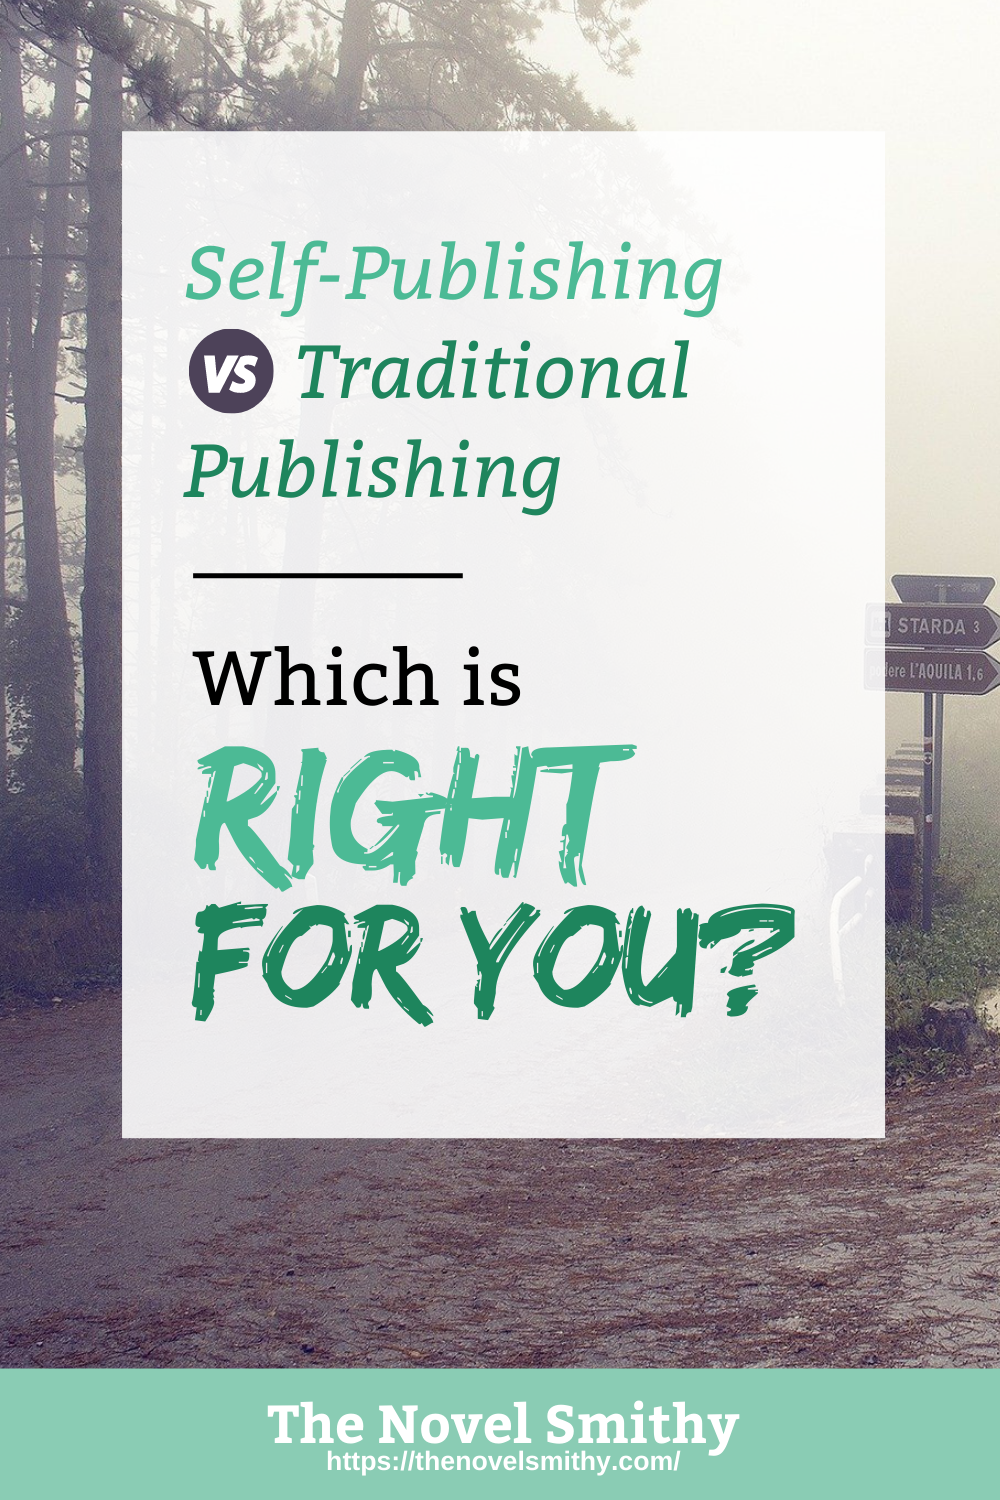 Self-Publishing vs. Traditional Publishing: Which is Right for You?